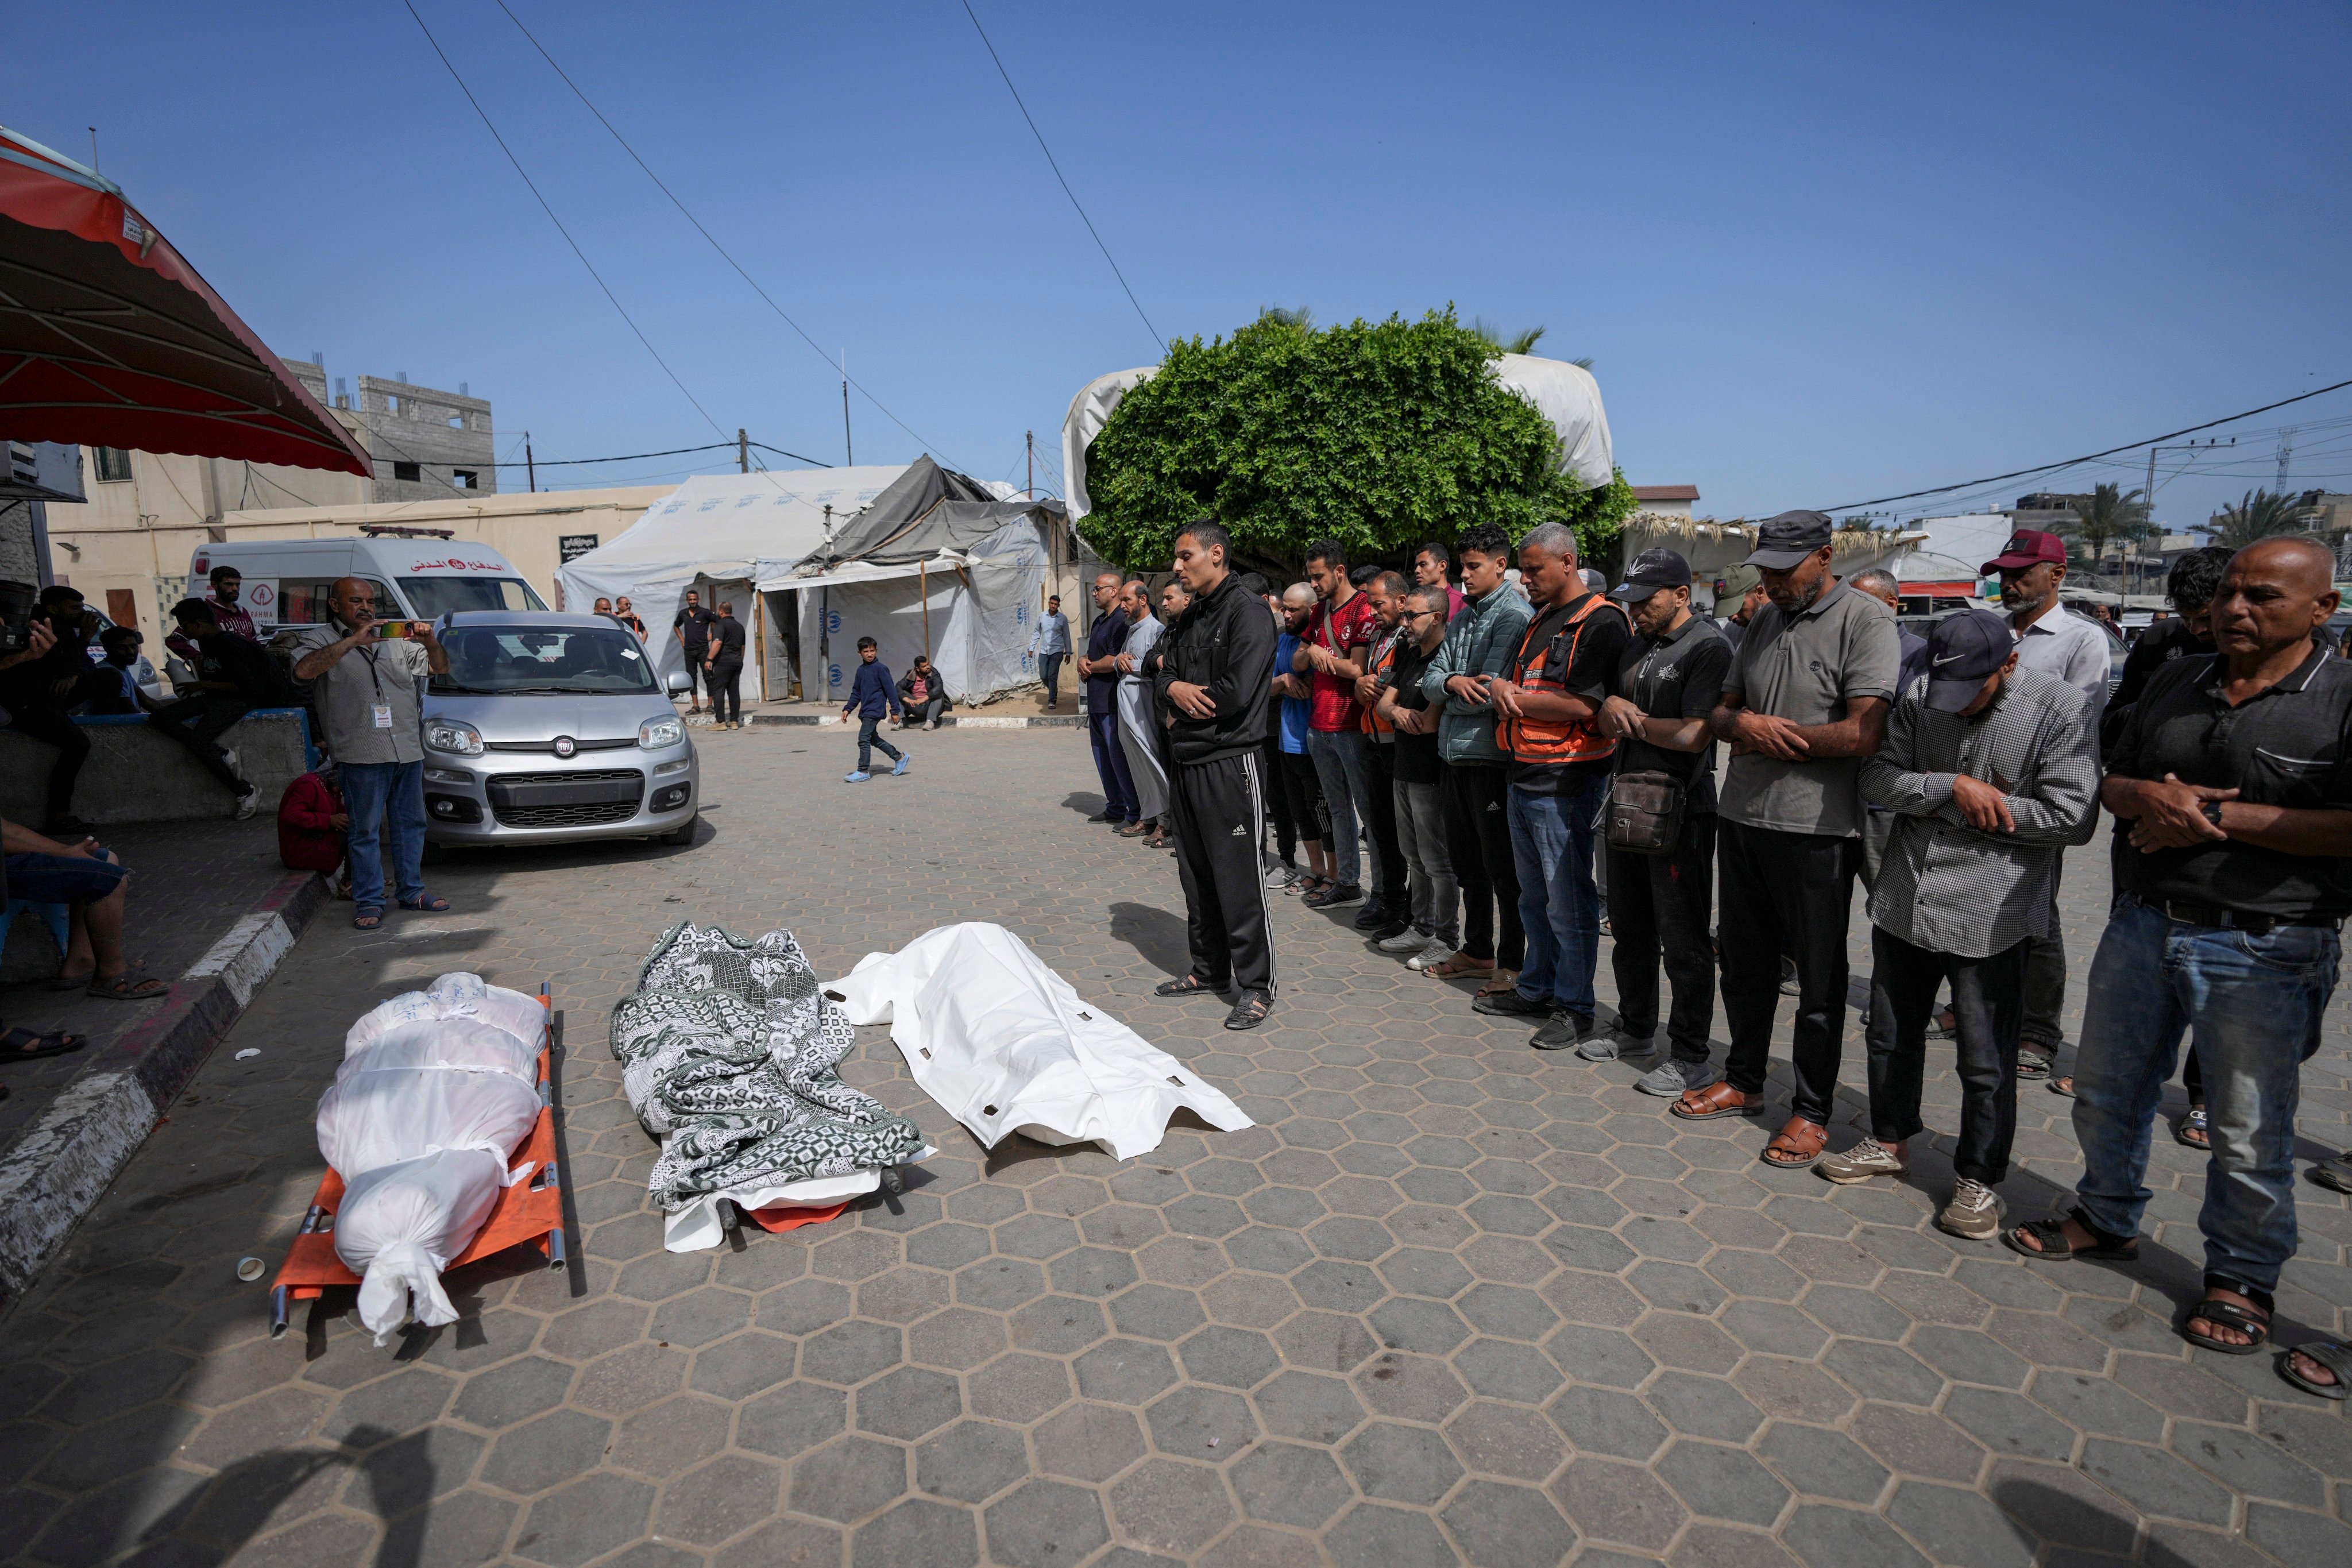 Palestinians pray next to the bodies of their relatives who were killed in an Israeli airstrike in Gaza Strip, at the Al Aqsa hospital. Photo: AP